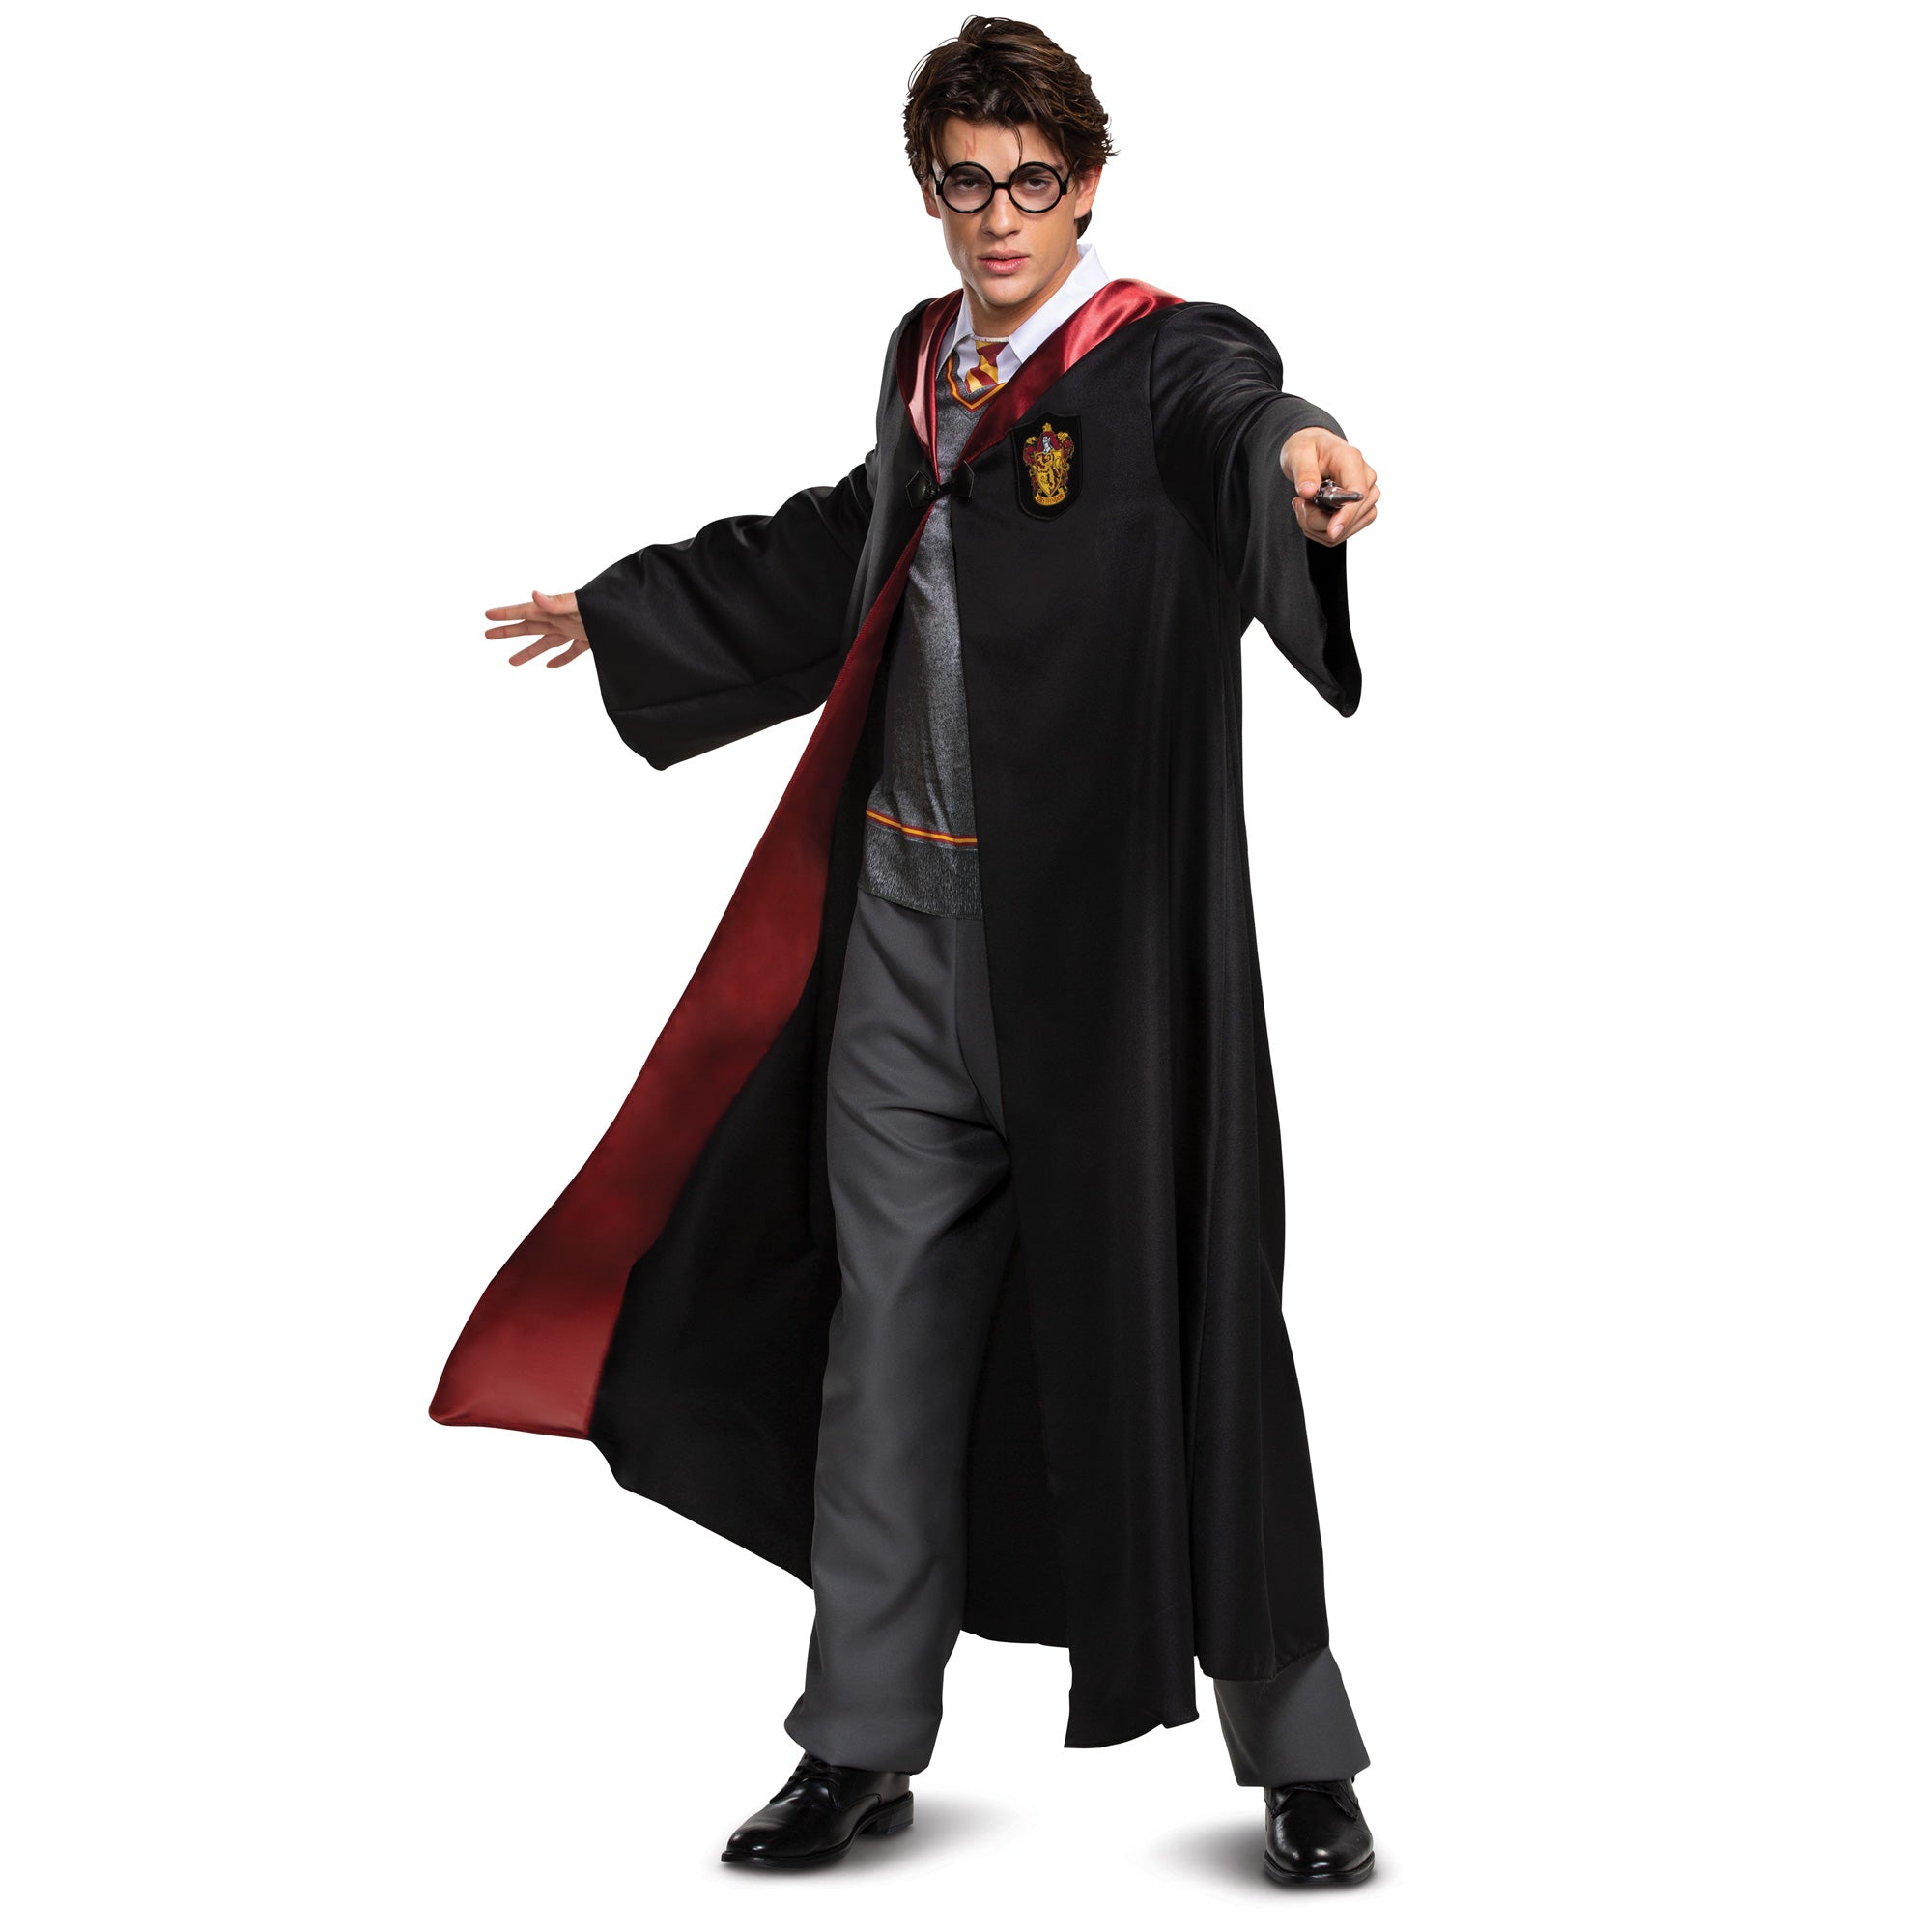 Robe deluxe pour adultes taille plus, Harry Potter